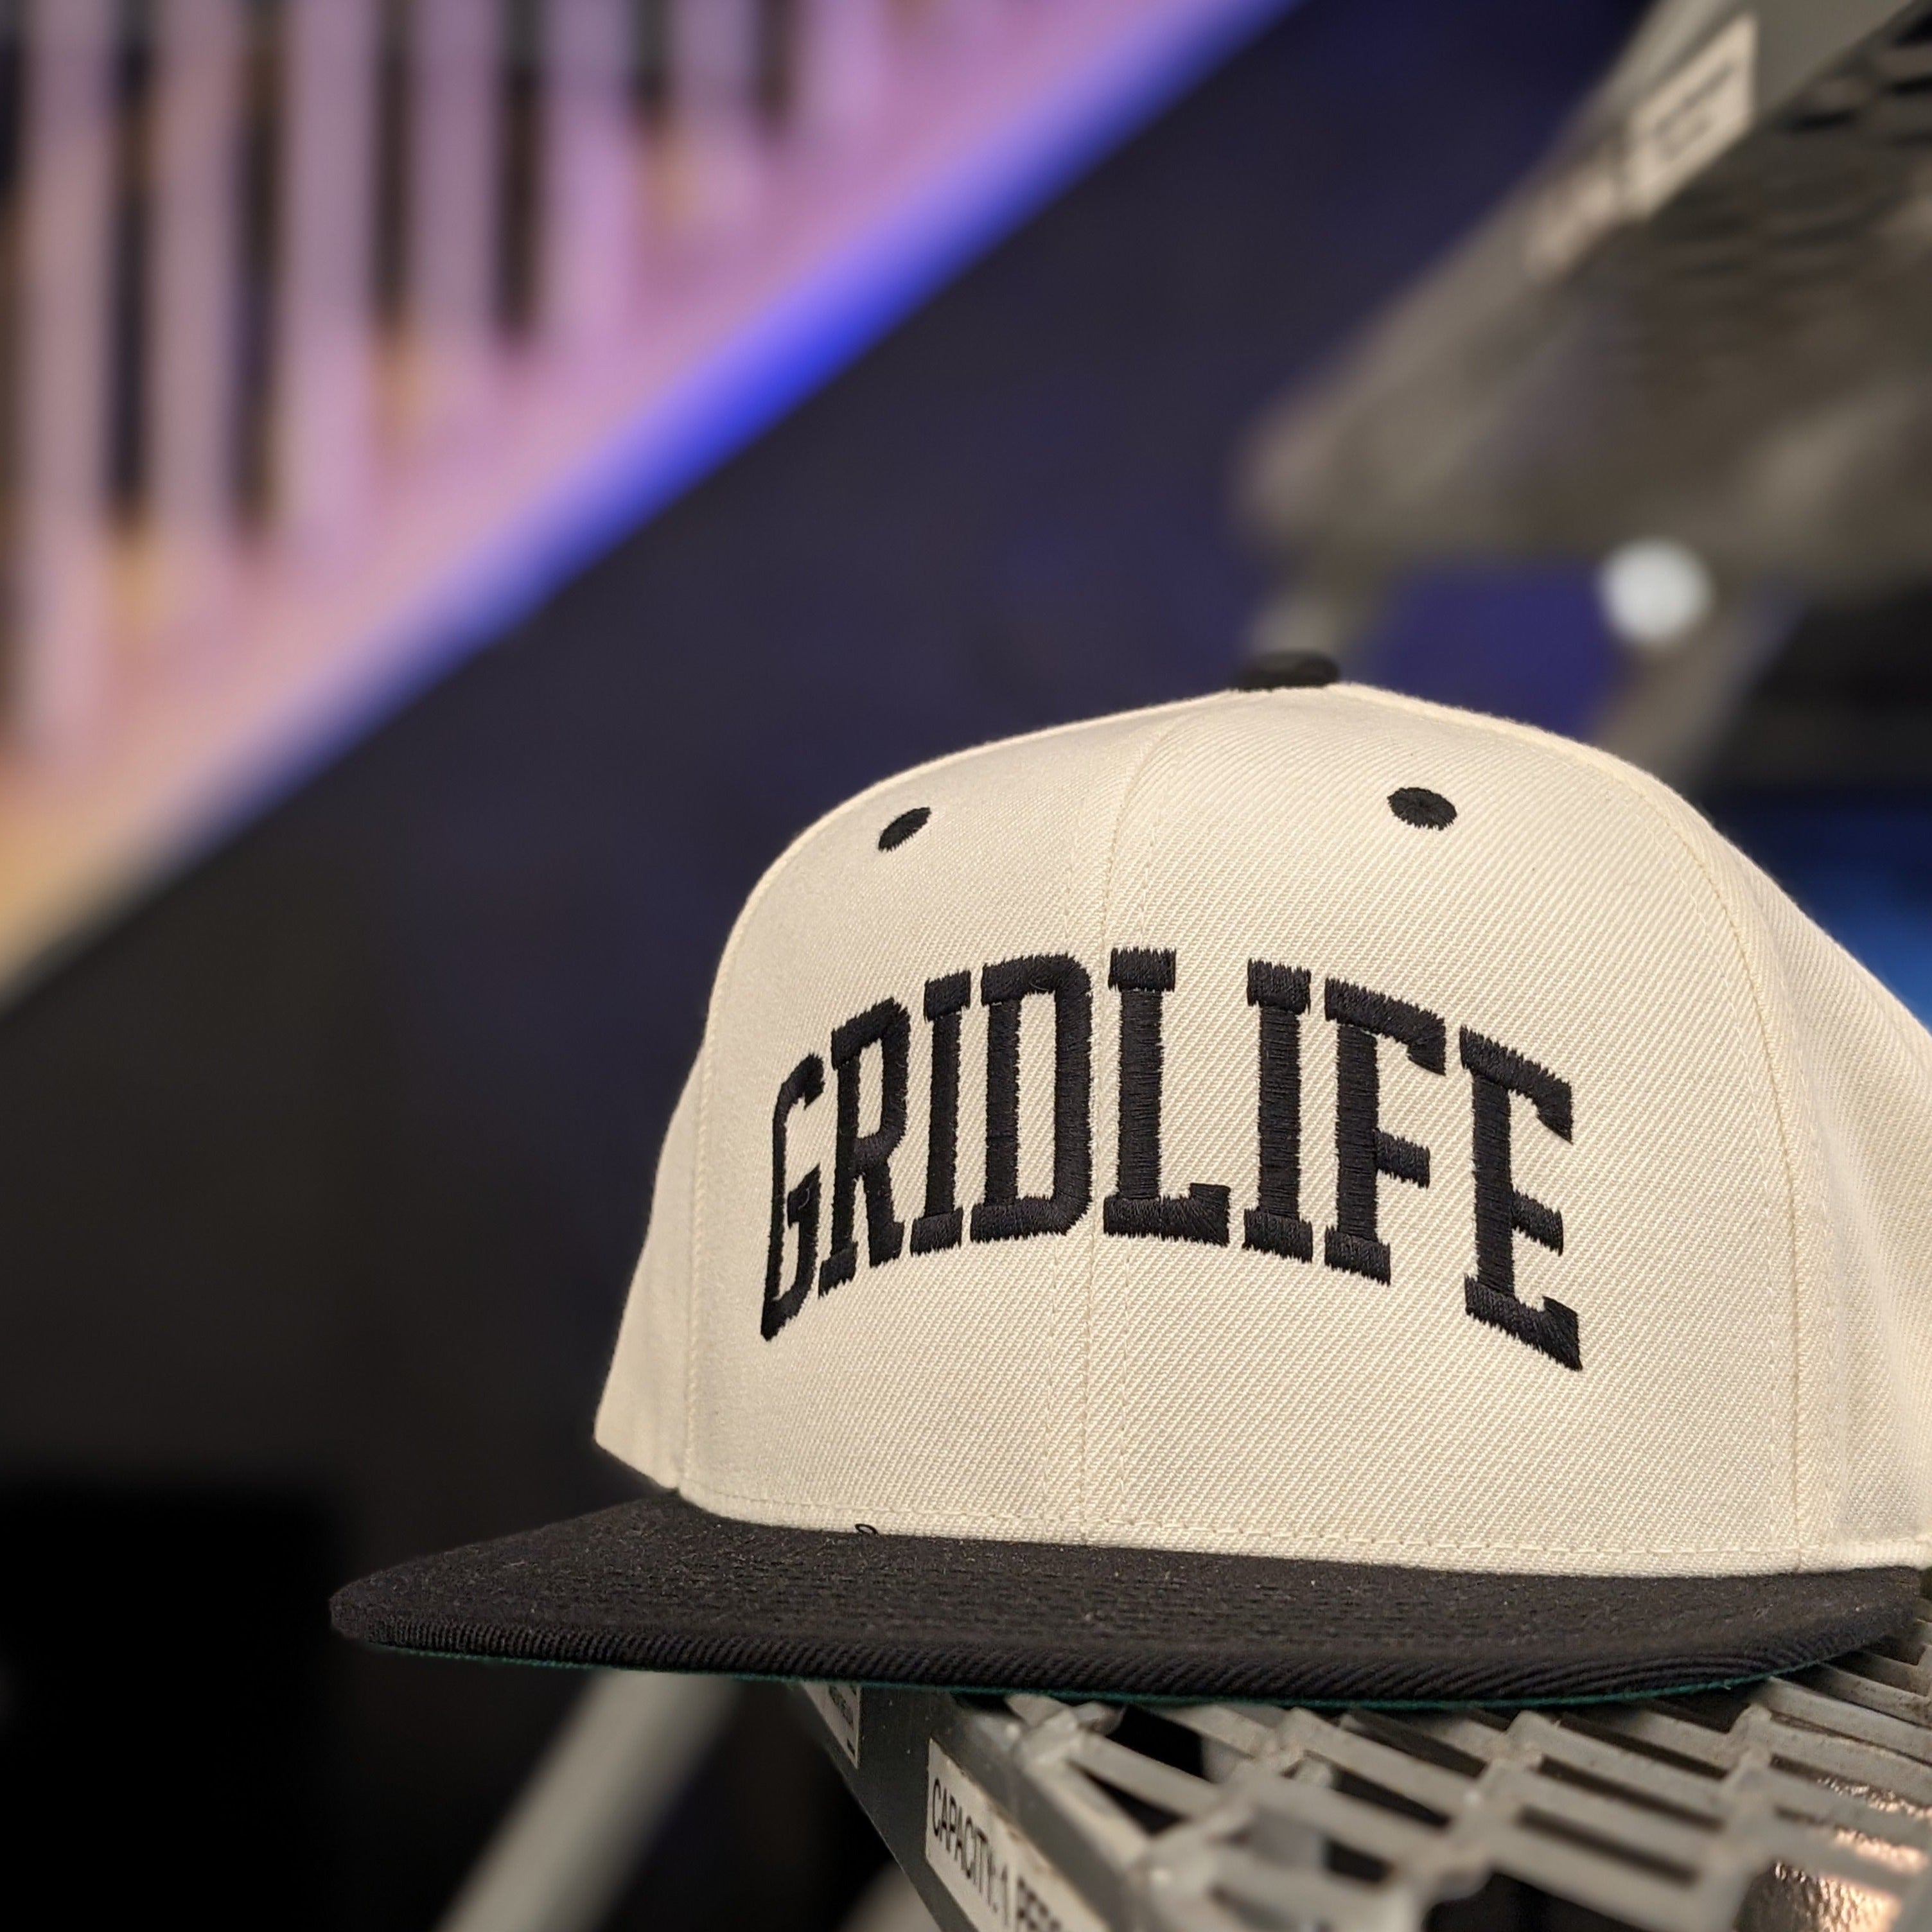 GRIDLIFE college style hat photographed in the warehouse